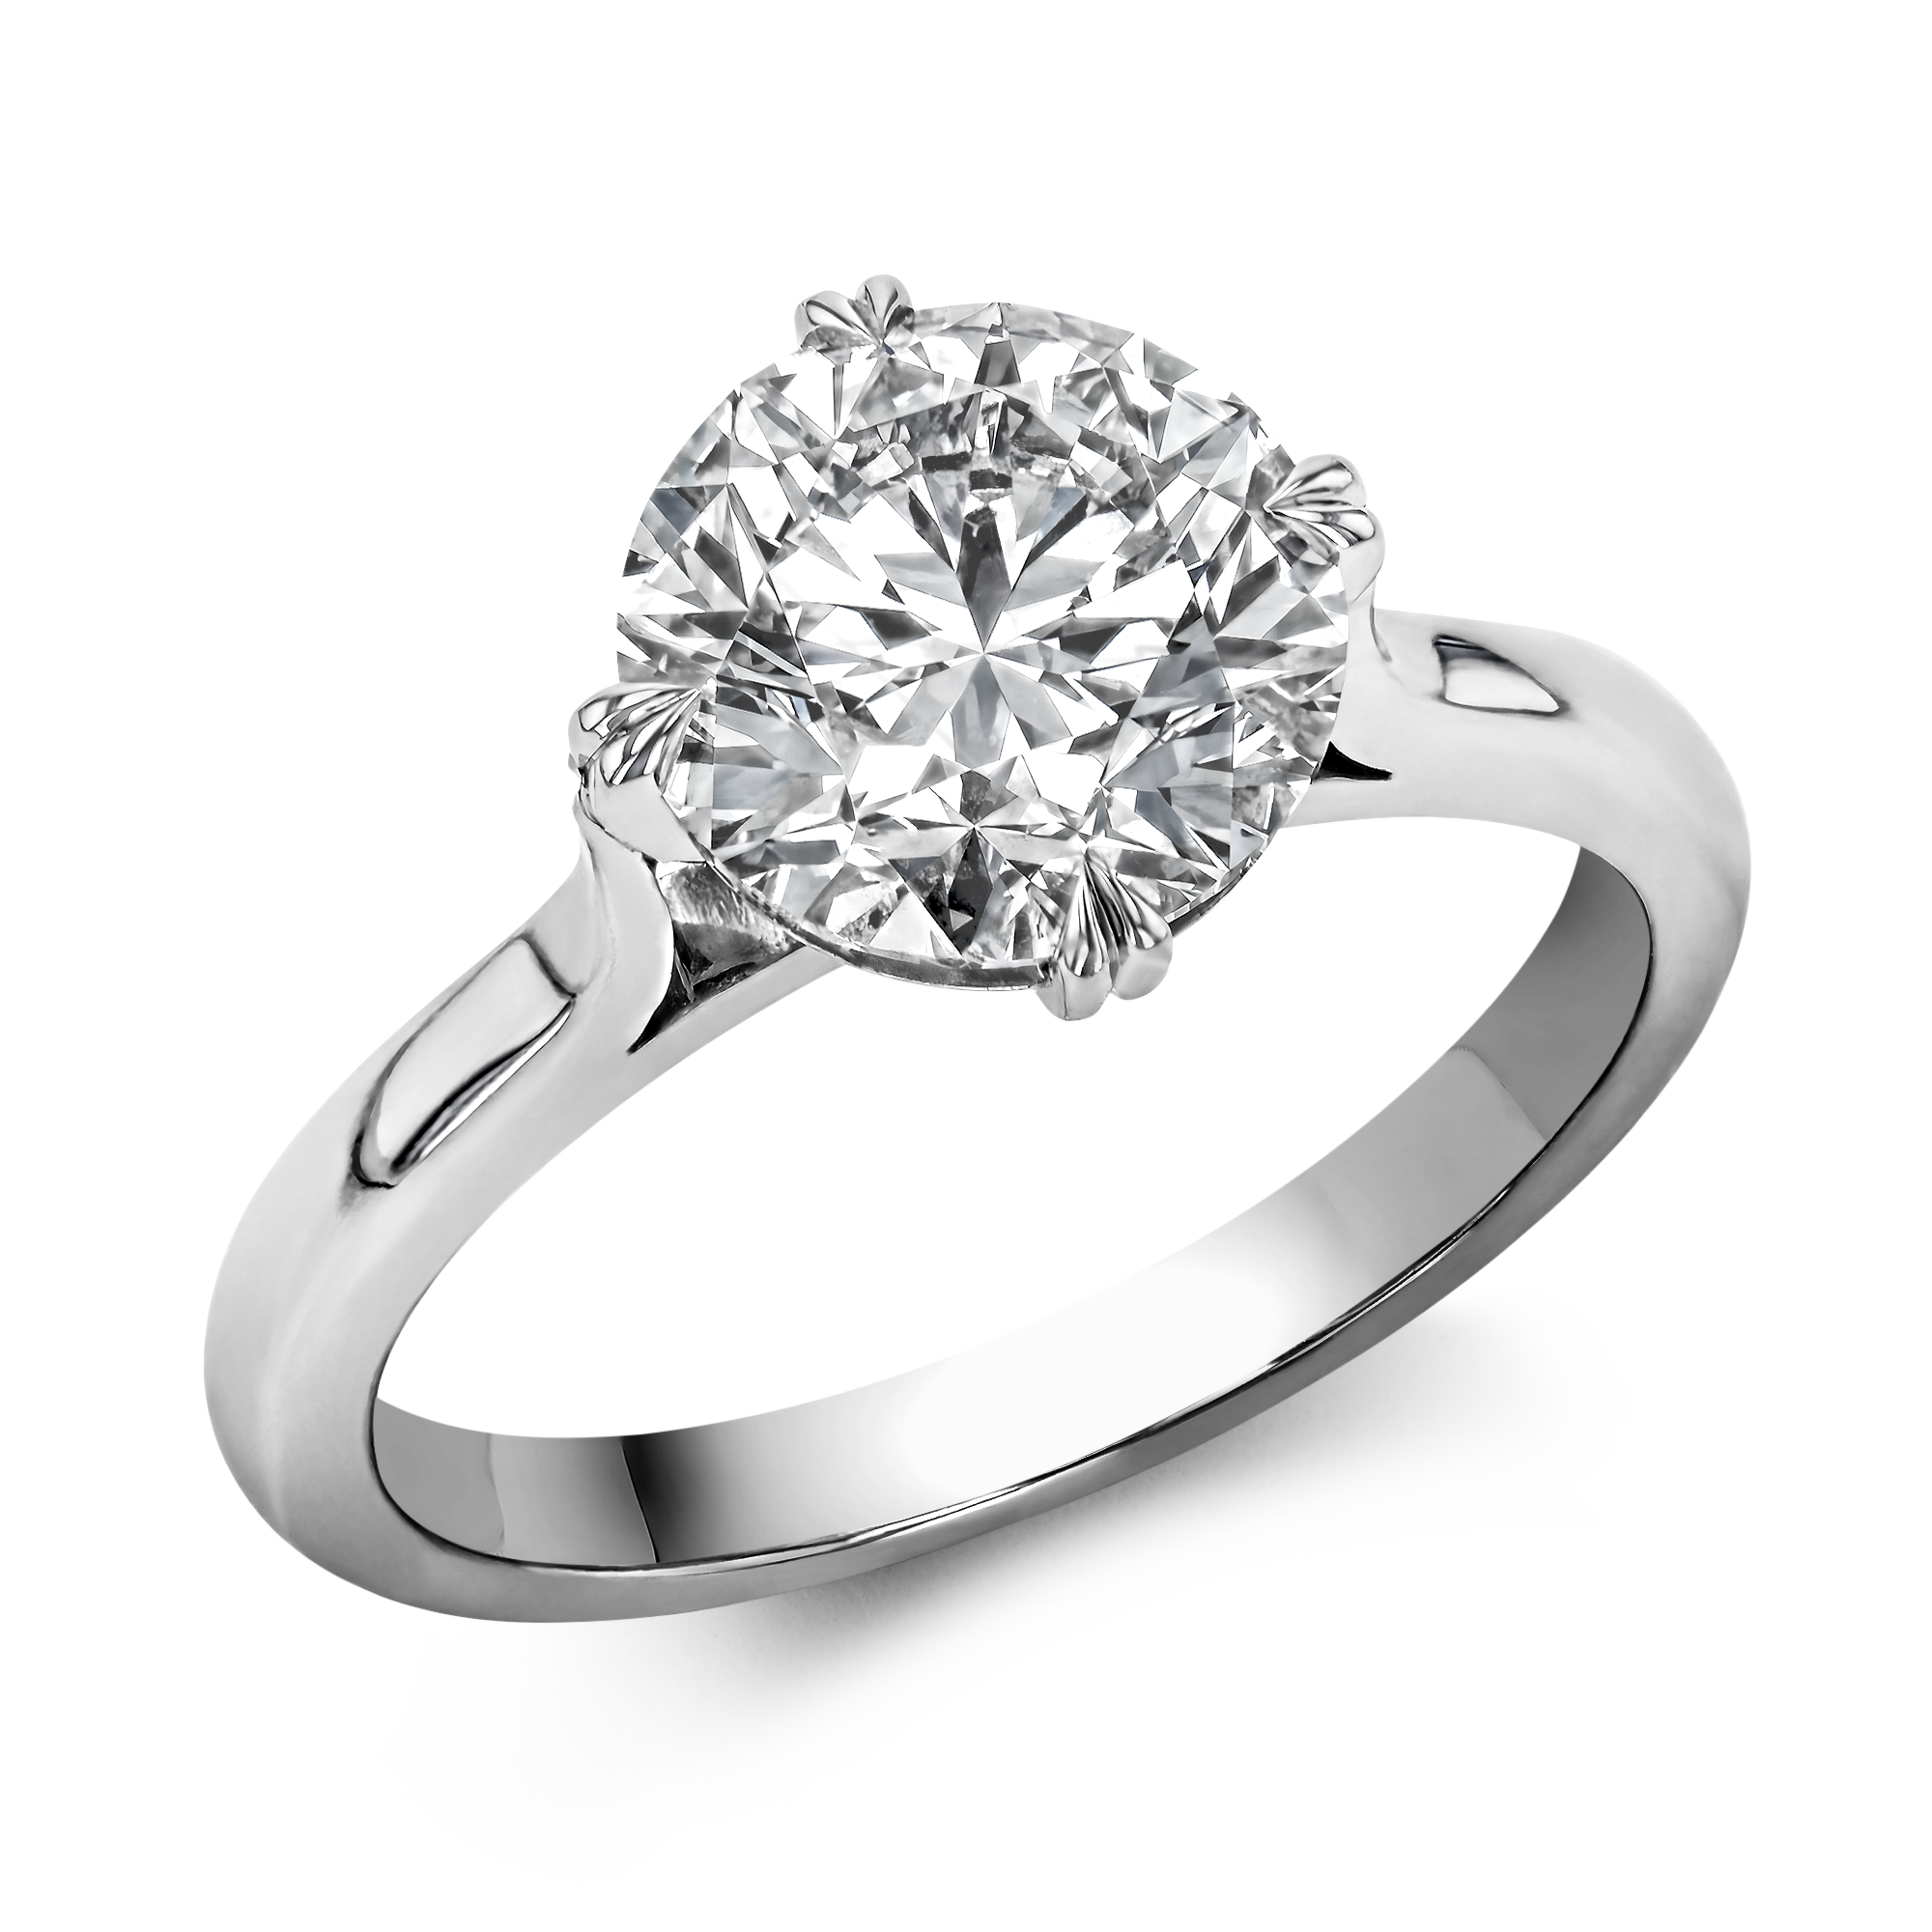 Windsor 2.52ct Diamond Solitaire Ring Brilliant cut, Claw set_1